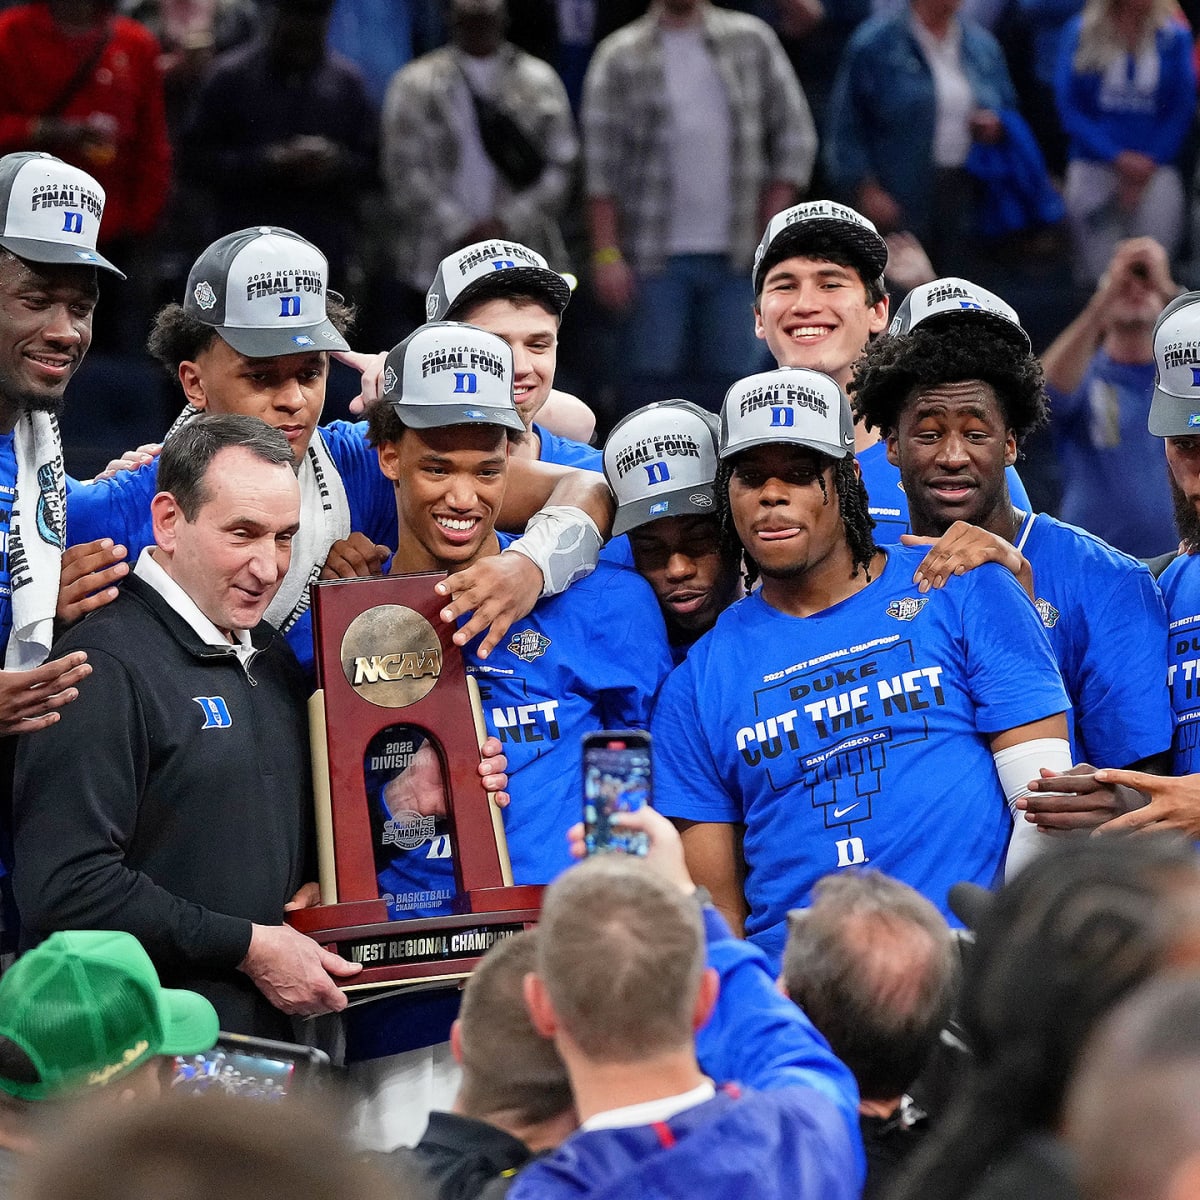 Duke, Coach K have epic ending in reach at Final Four - Sports Illustrated